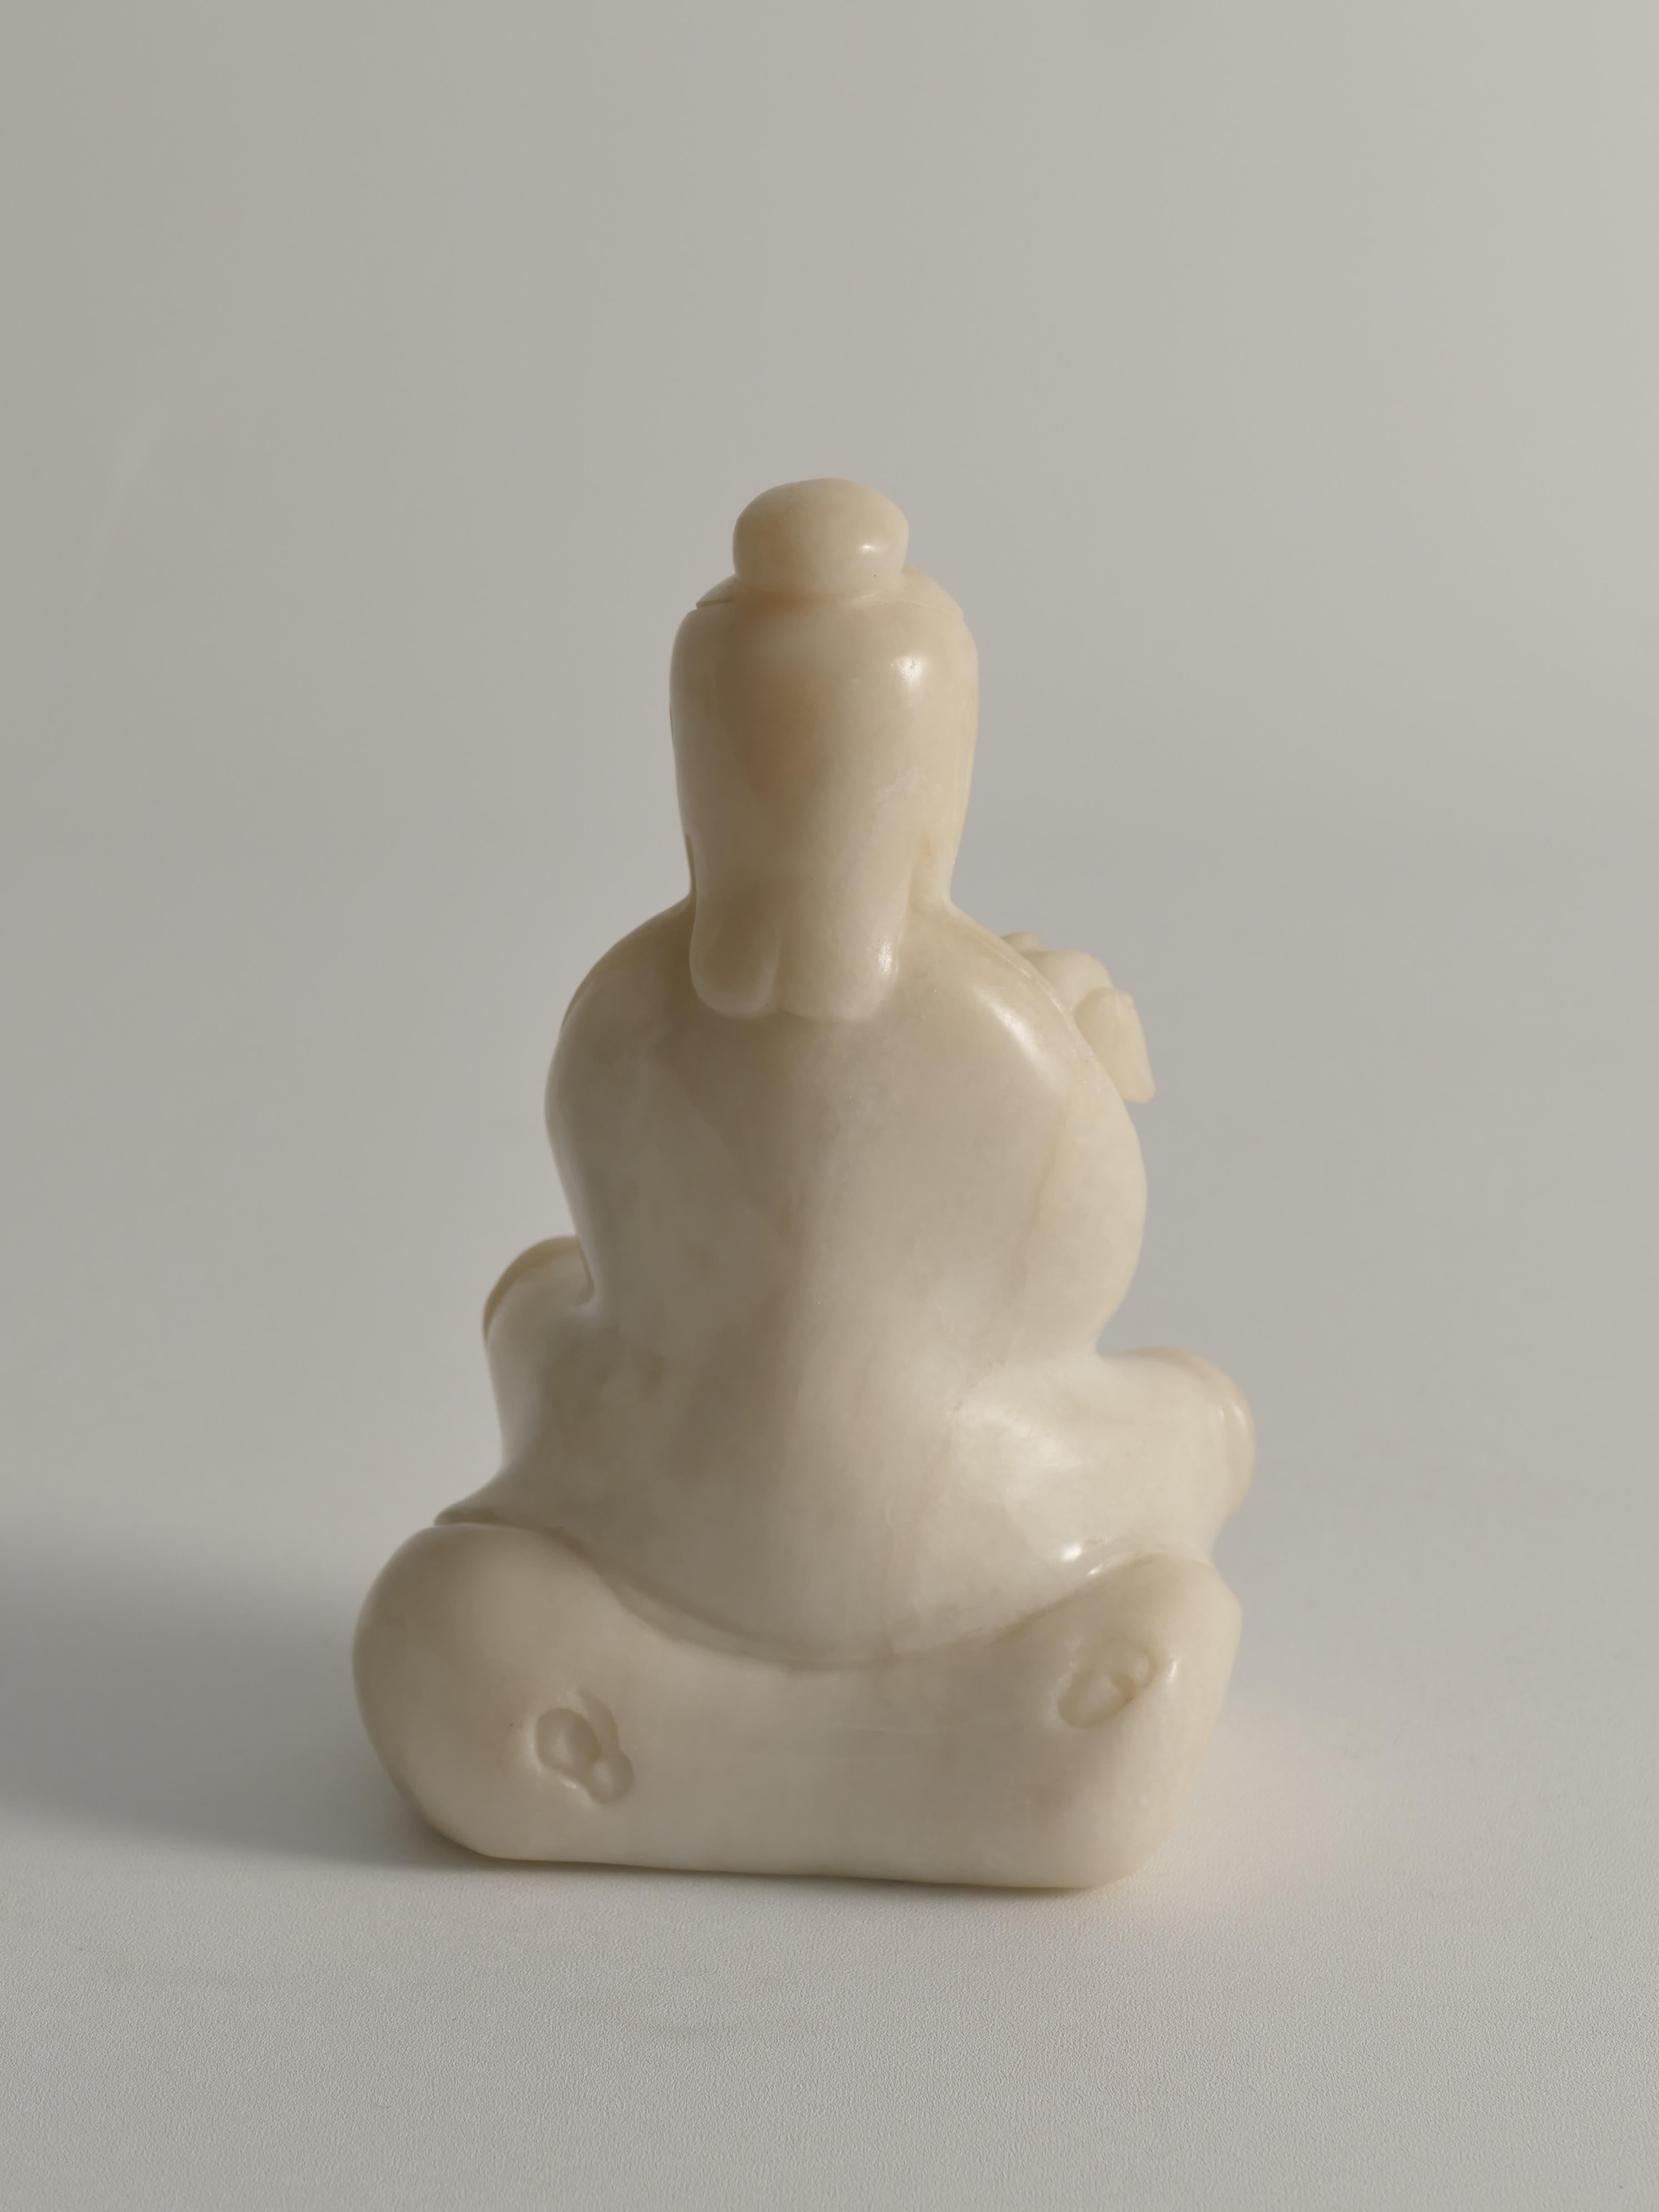 Hand-Carved White Alabaster Figure of Guanyin, China, Early 20th Century For Sale 4